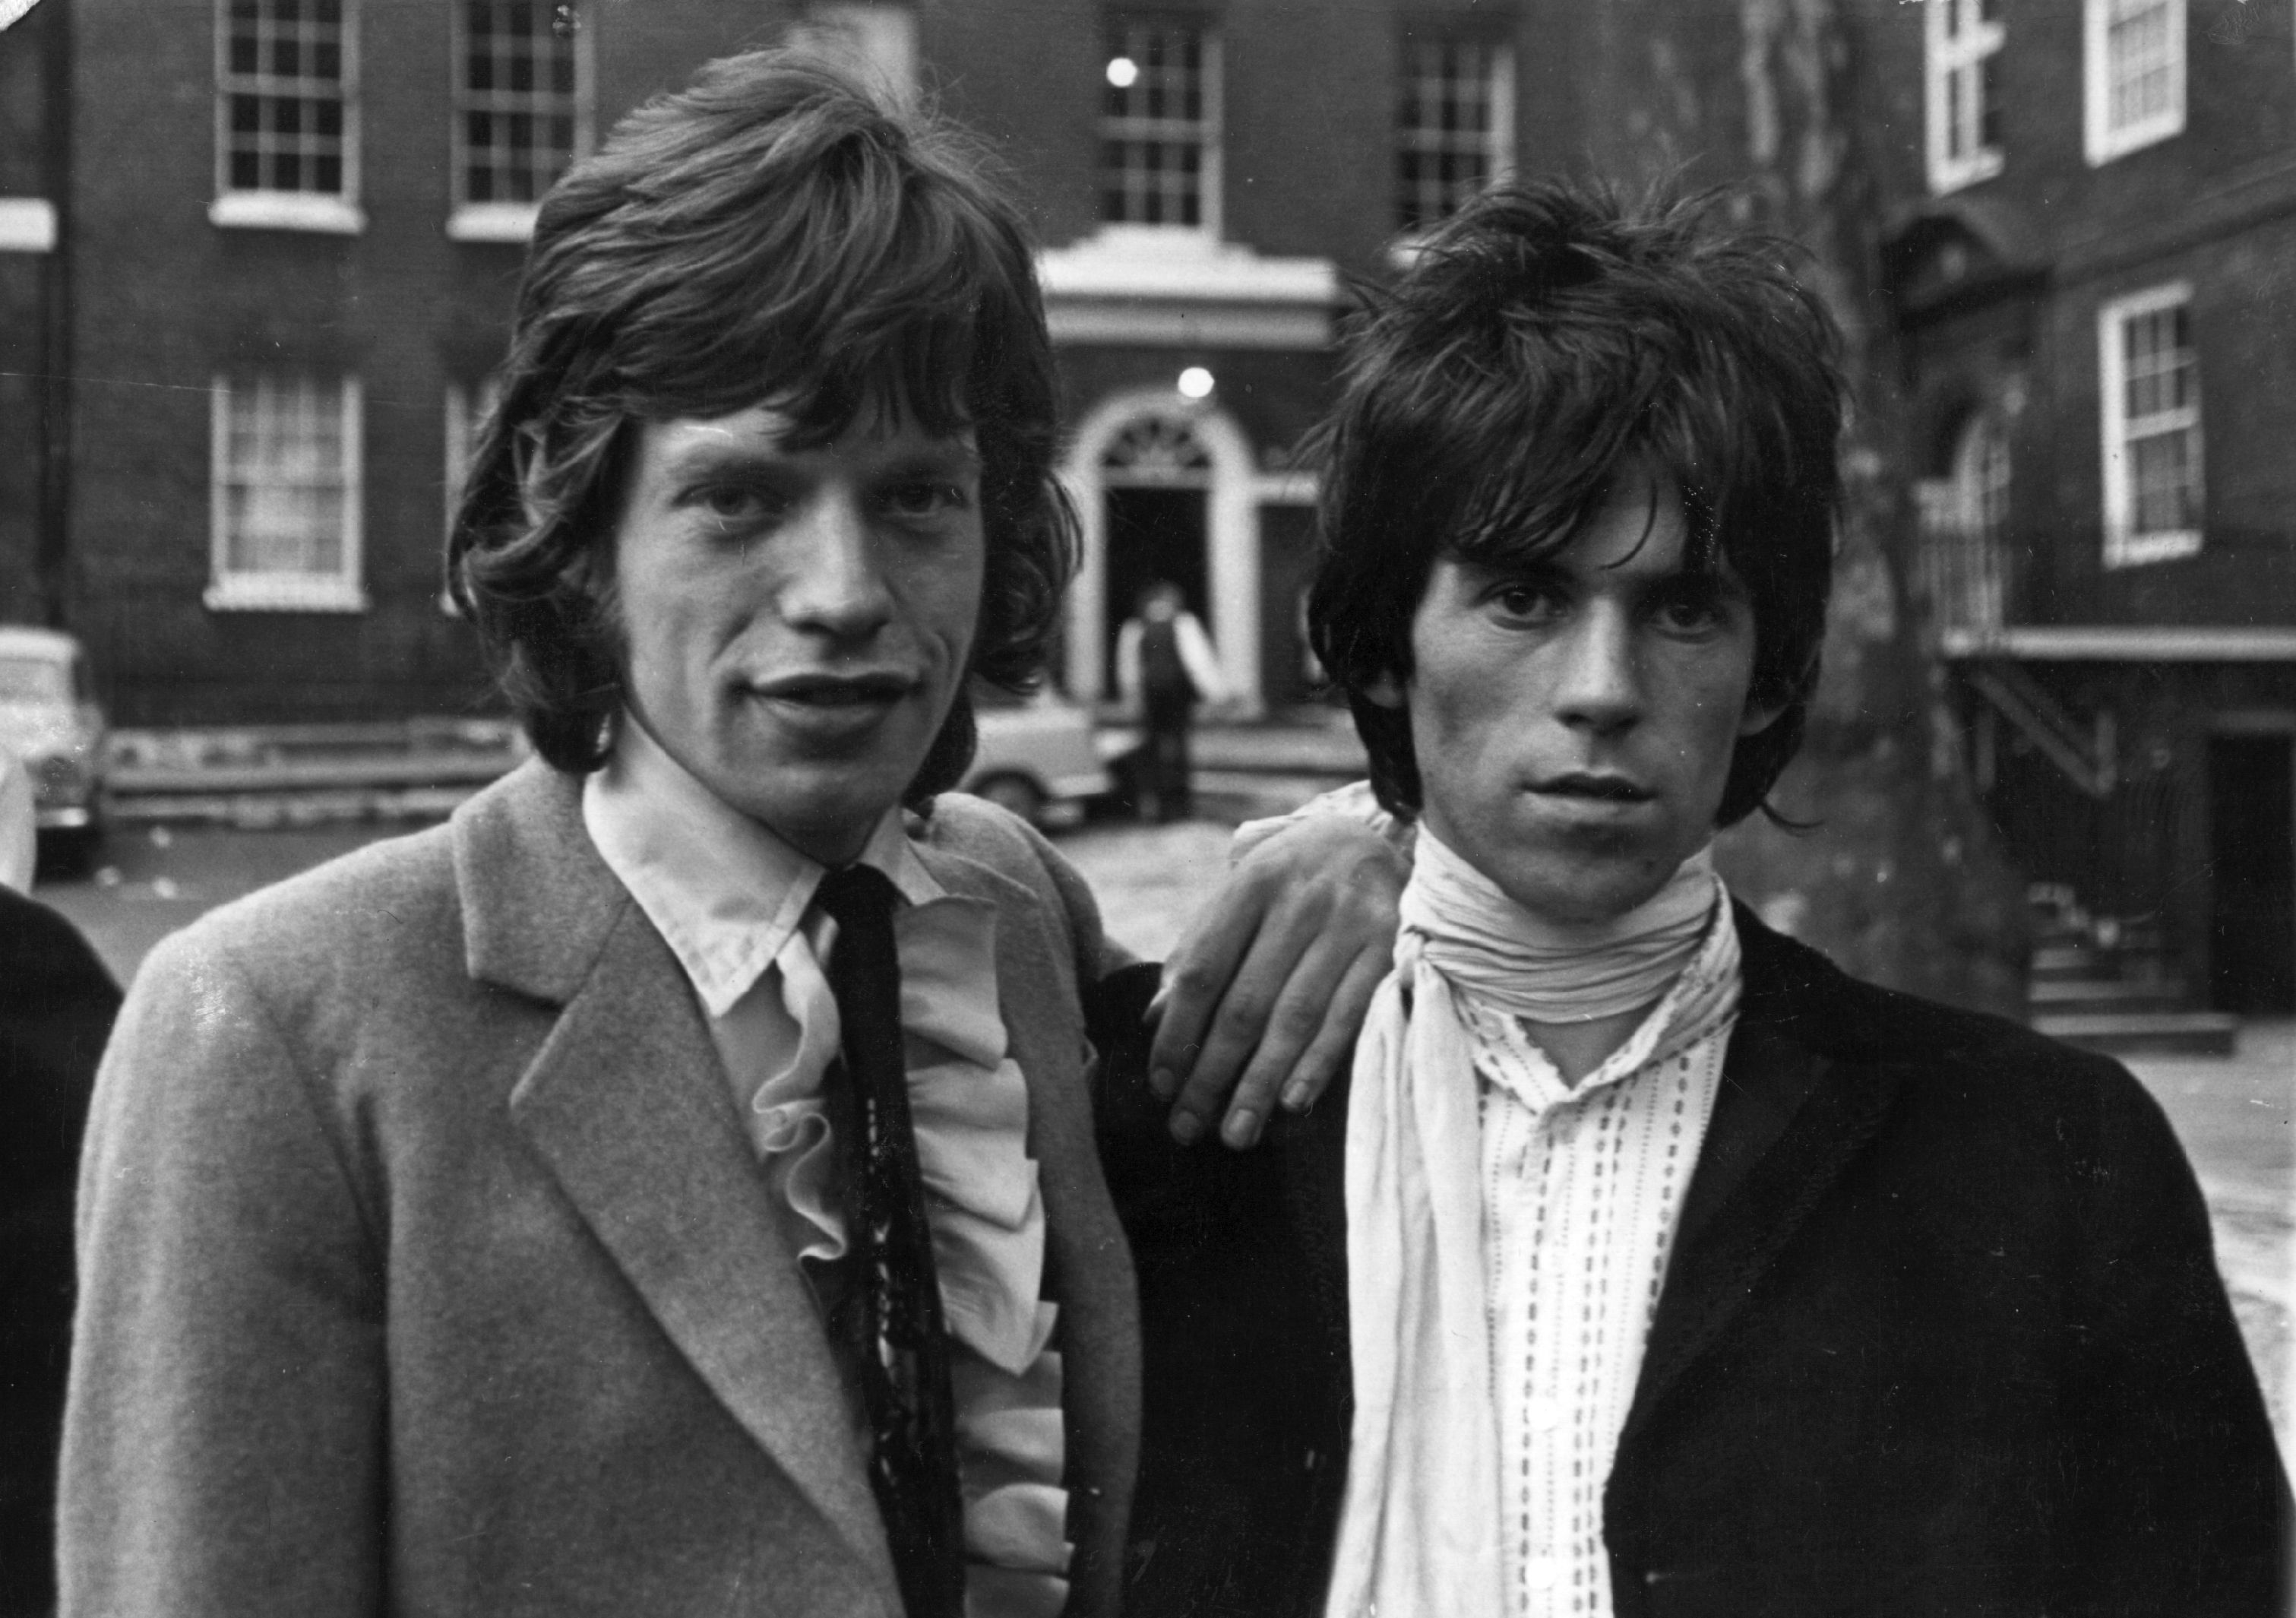 Keith Richards Named the 1st Rolling Stones Song the Band Was Happy With